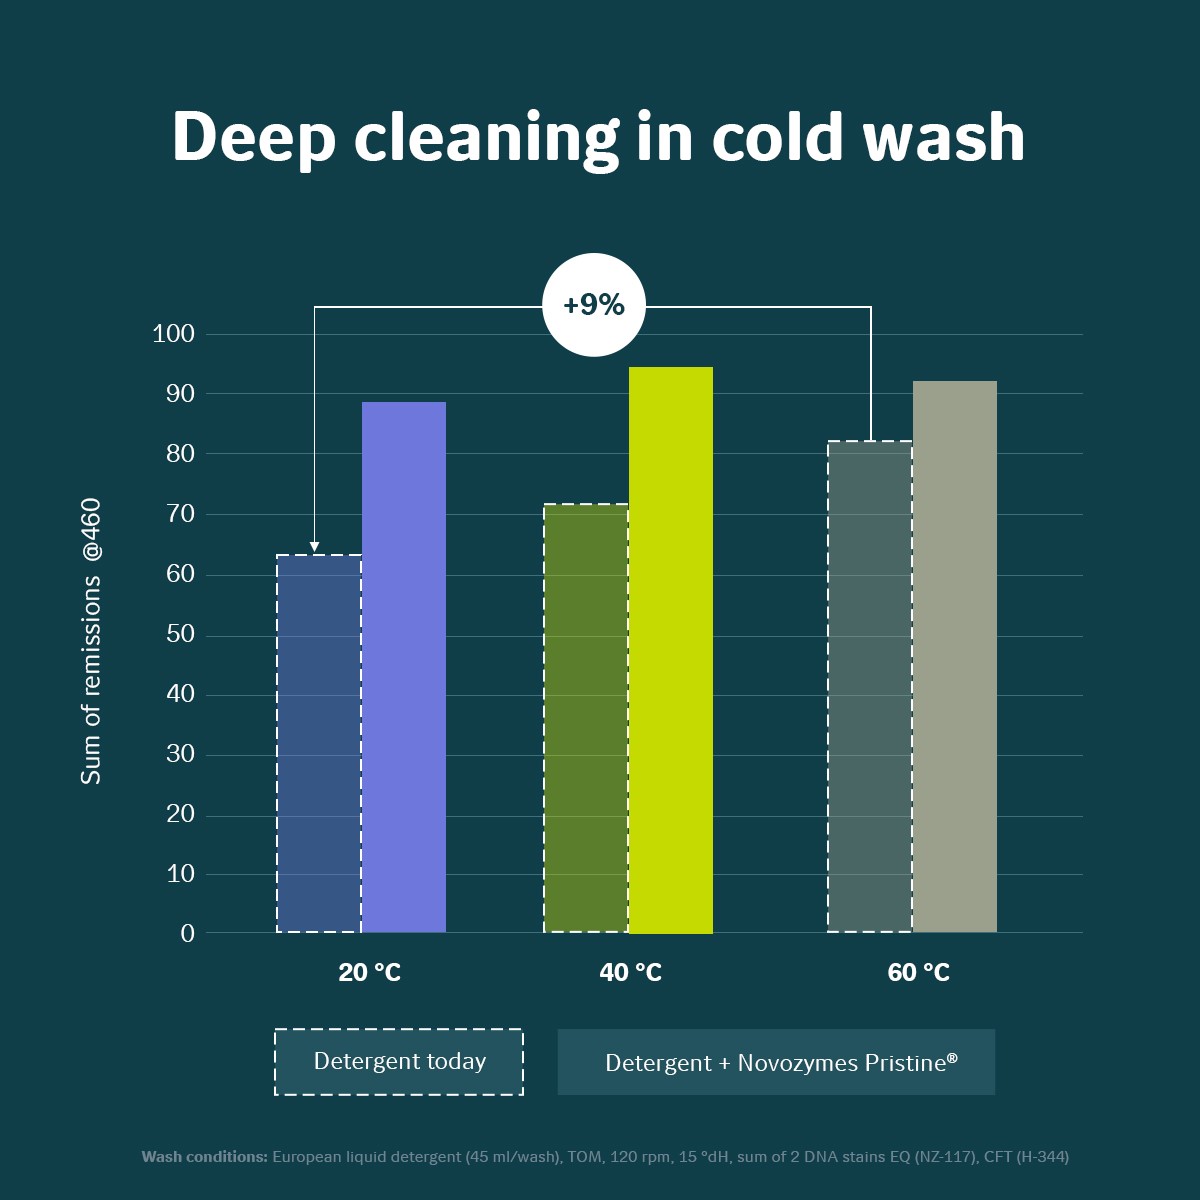 Deep cleaning in cold wash with Pristine